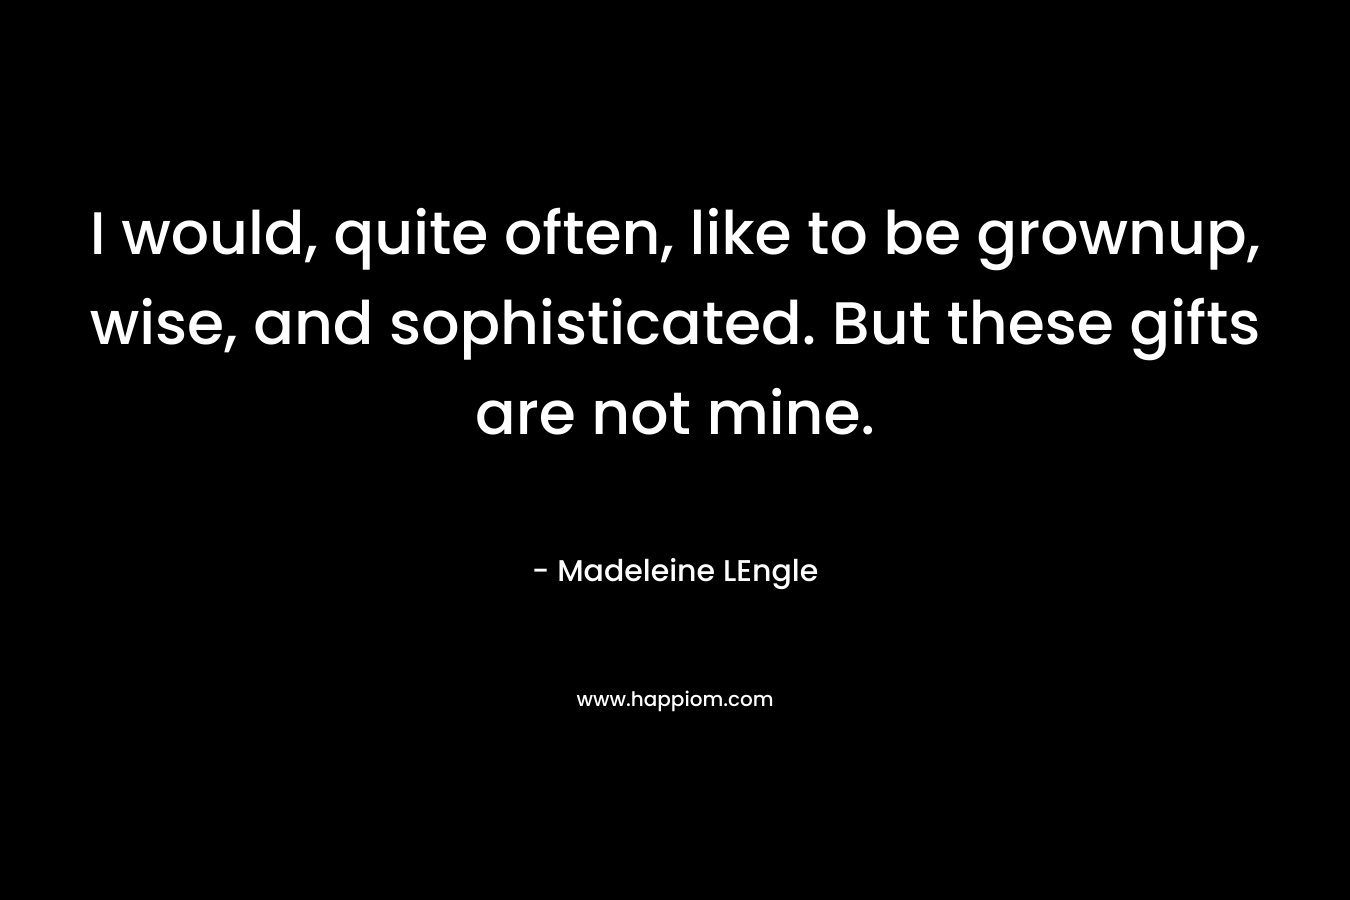 I would, quite often, like to be grownup, wise, and sophisticated. But these gifts are not mine. – Madeleine LEngle